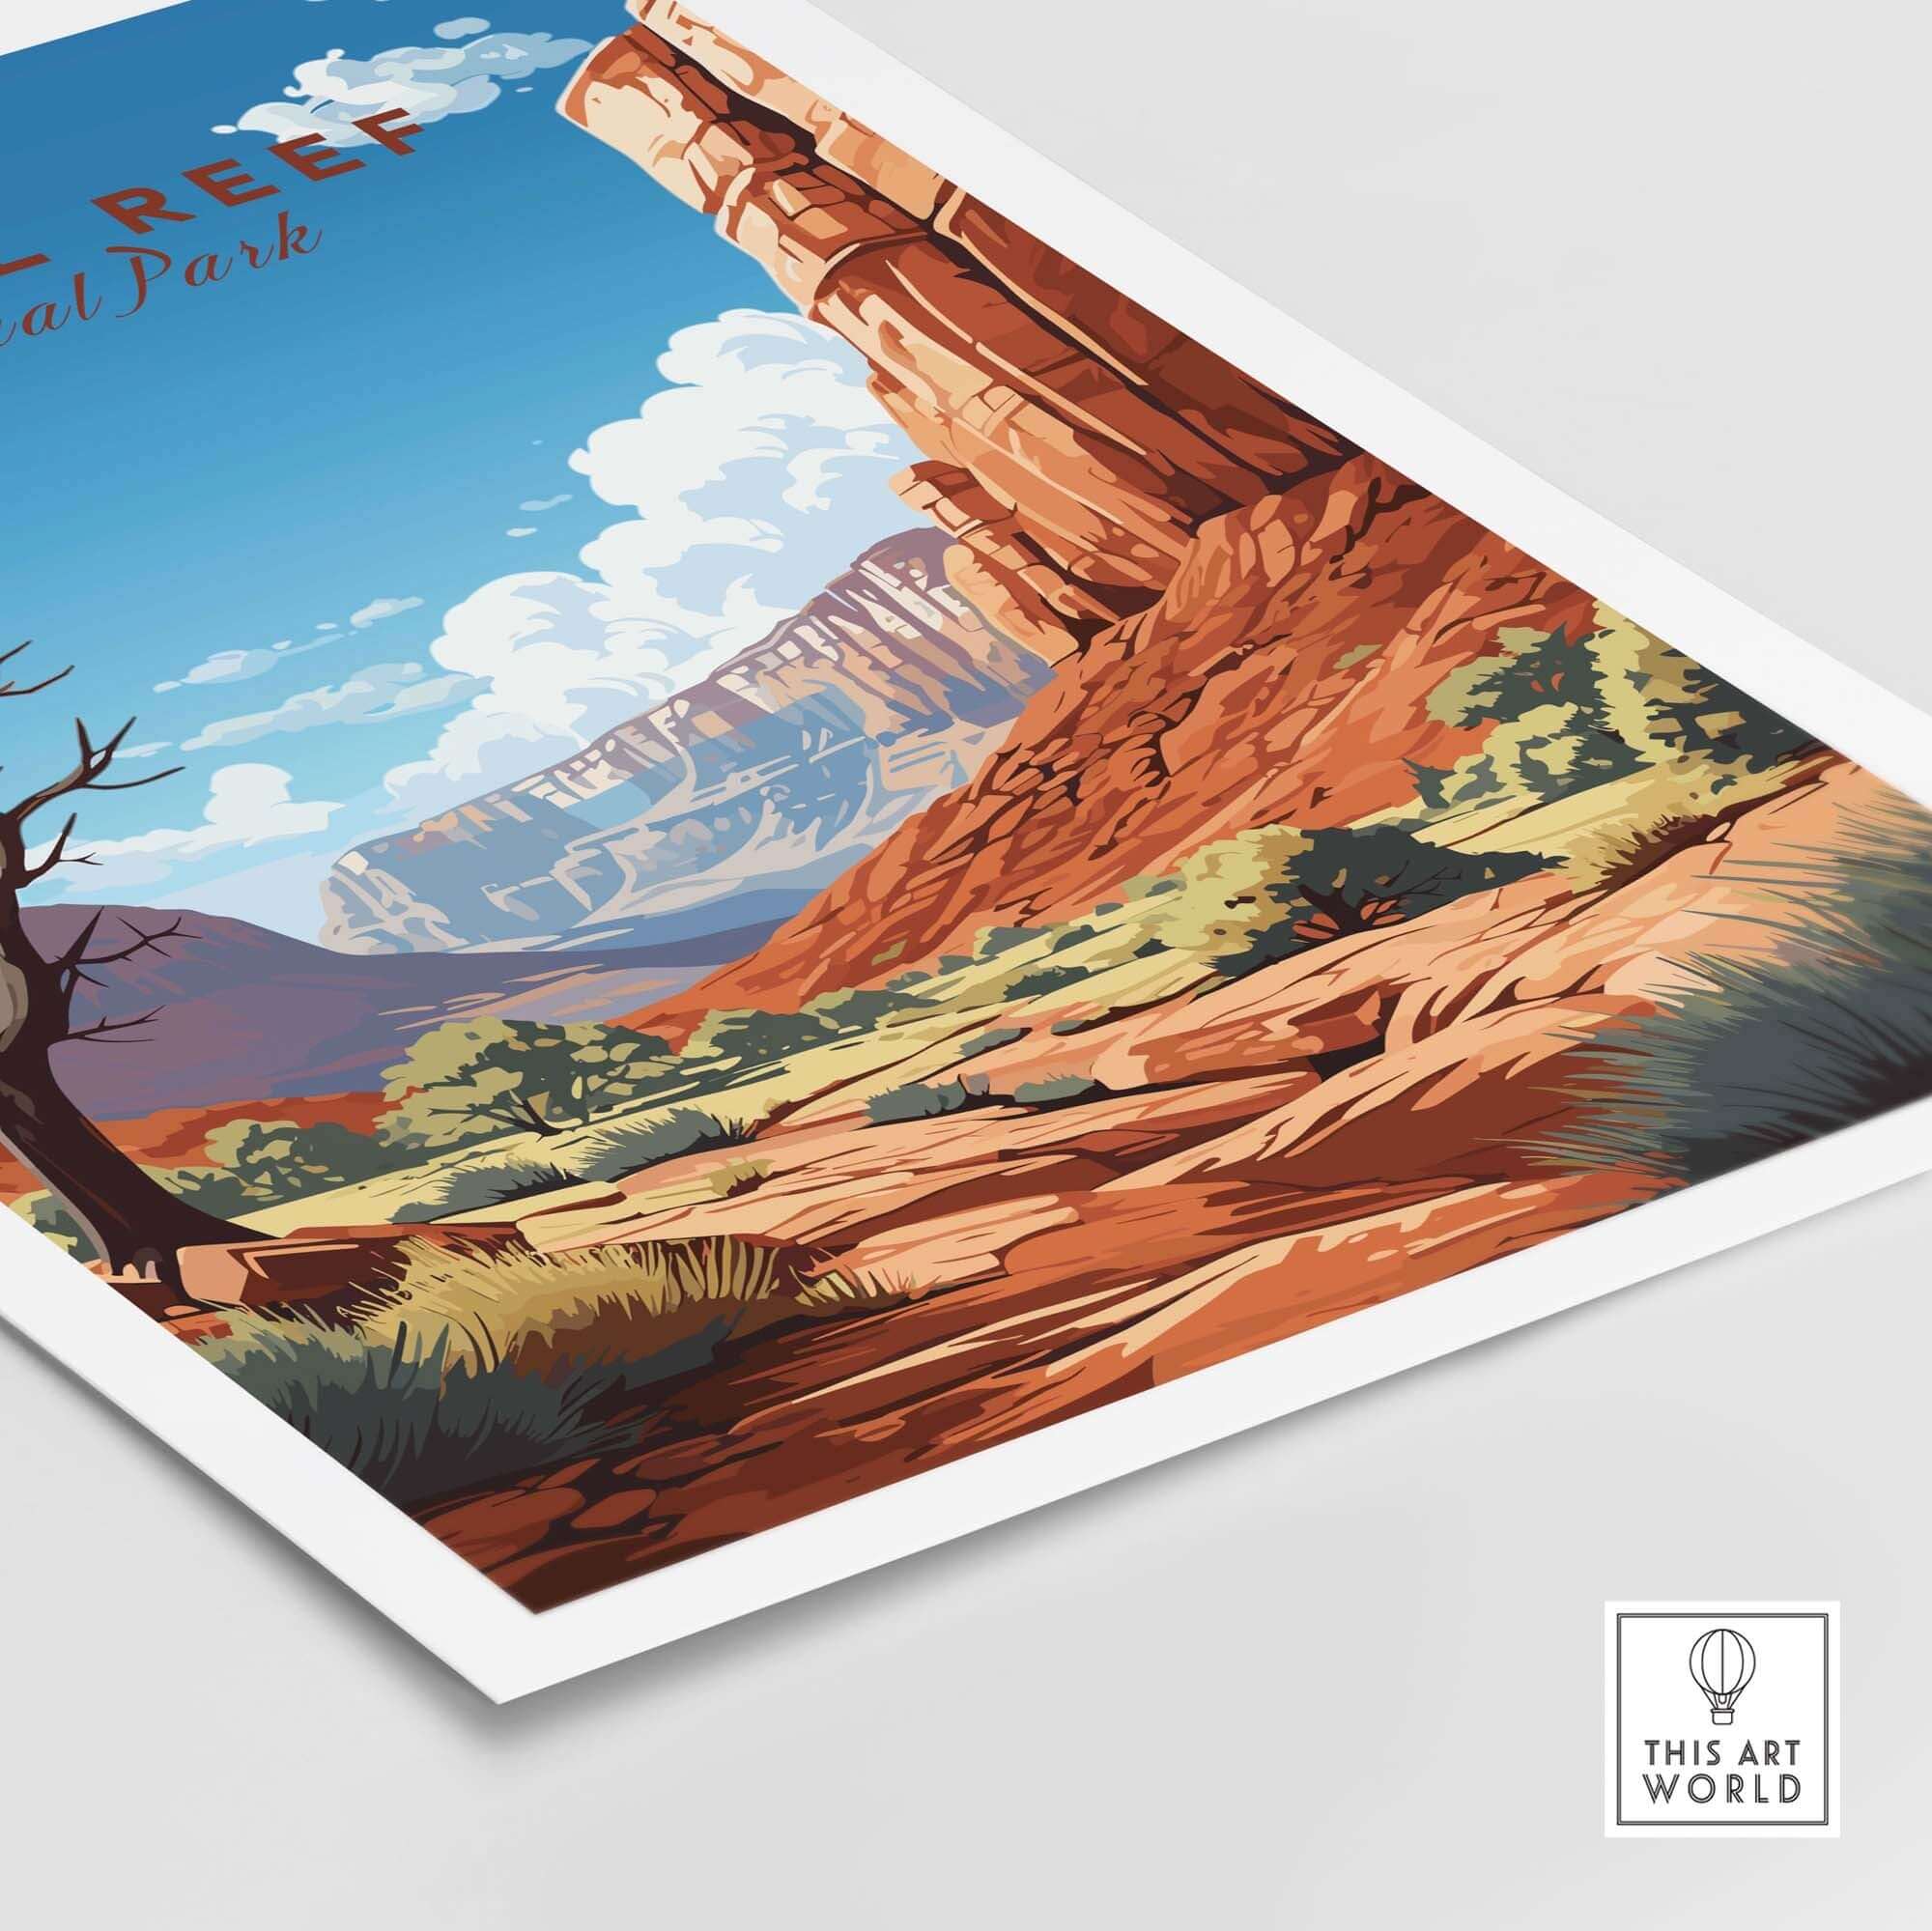 Capitol Reef National Park Poster